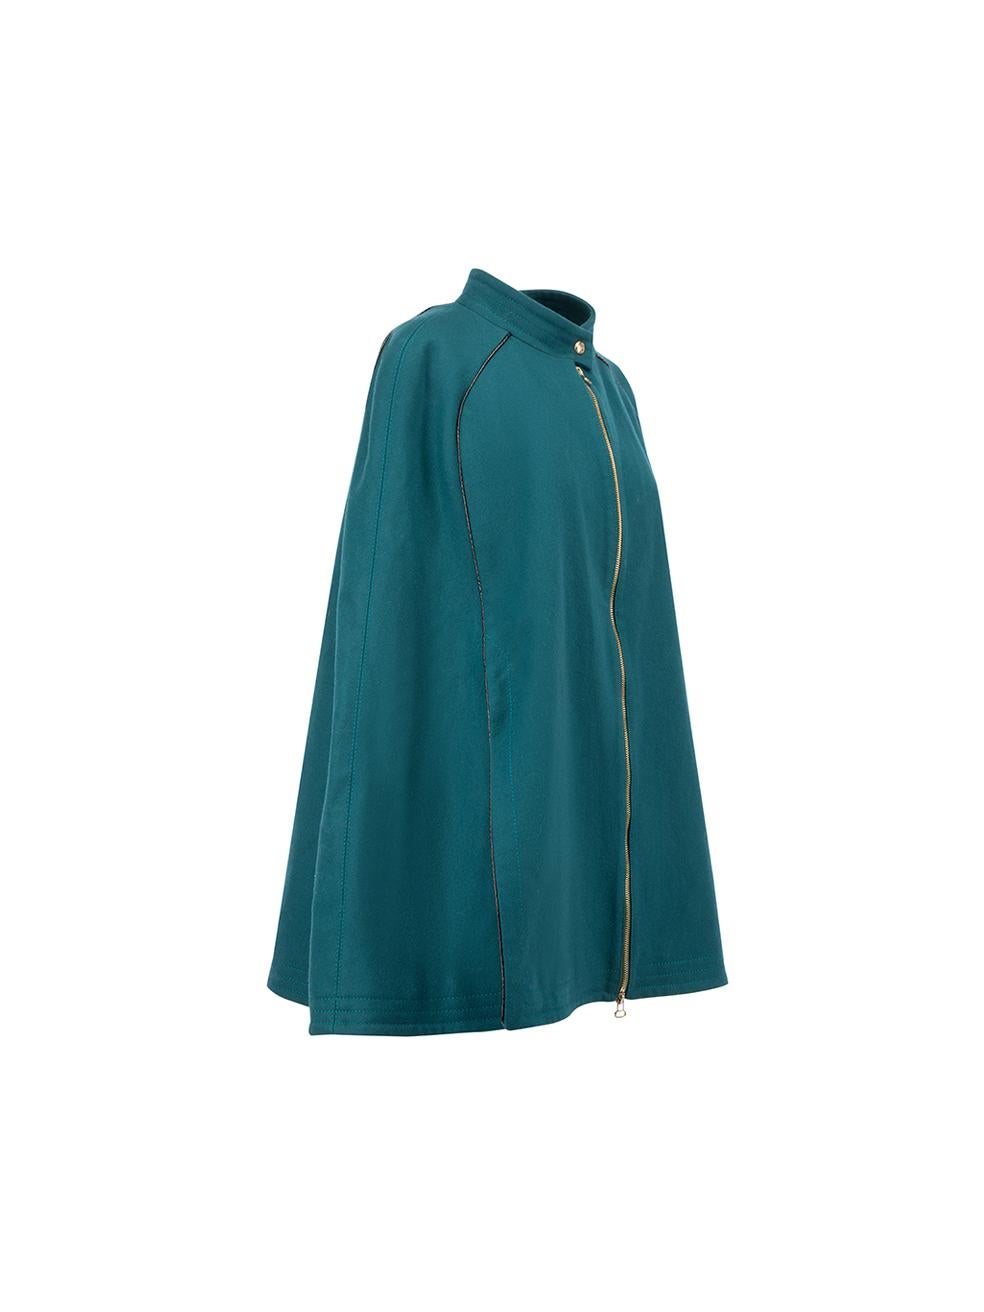 CONDITION is Very good. Minimal wear to cape is evident. Minimal wear to the gold zip which is tarnished, and the outer fabric which attracts loose fluff on this used Matthew Williamson designer resale item. 
 
 Details
  Green
 Wool
 Cape
 Hip